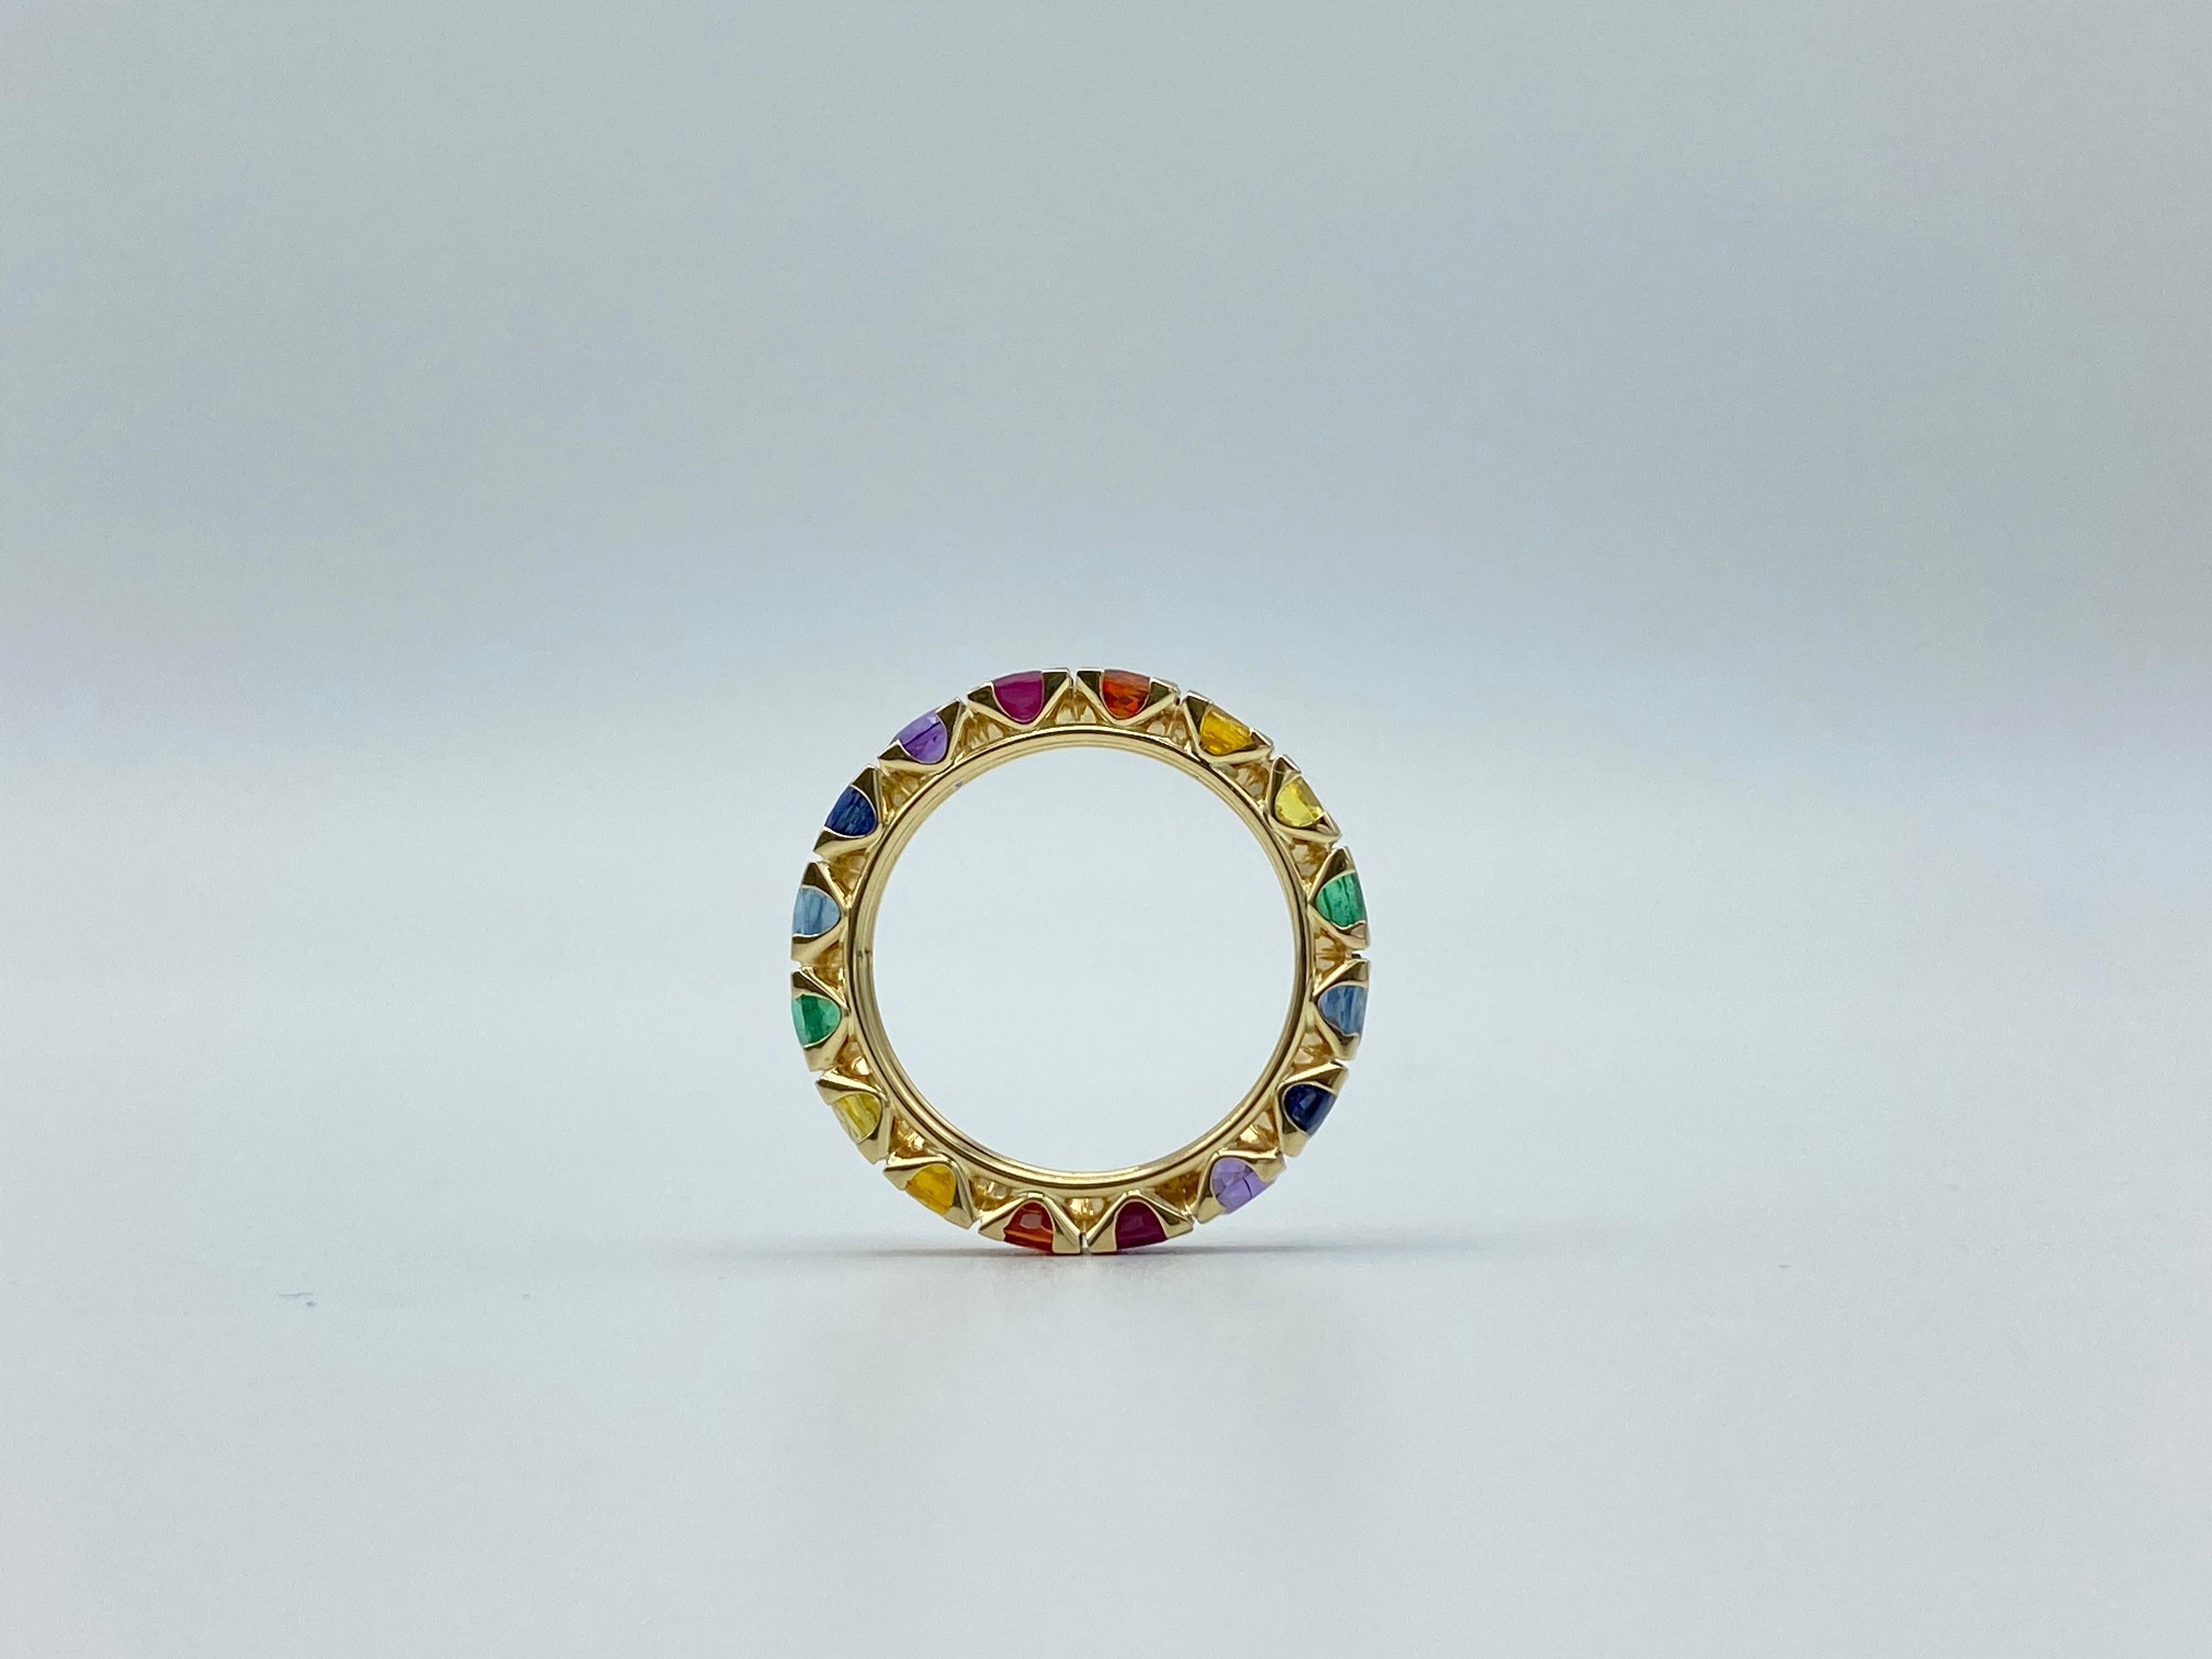 This multicolor eternity ring is set from 16 stones. It has yellow, dark yellow, orange, and blue sapphires; emeralds, rubies, aquamarine and amethyst. 
I put the stones in color gradation to get a rainbow surrounding the finger.

The yellow gold is